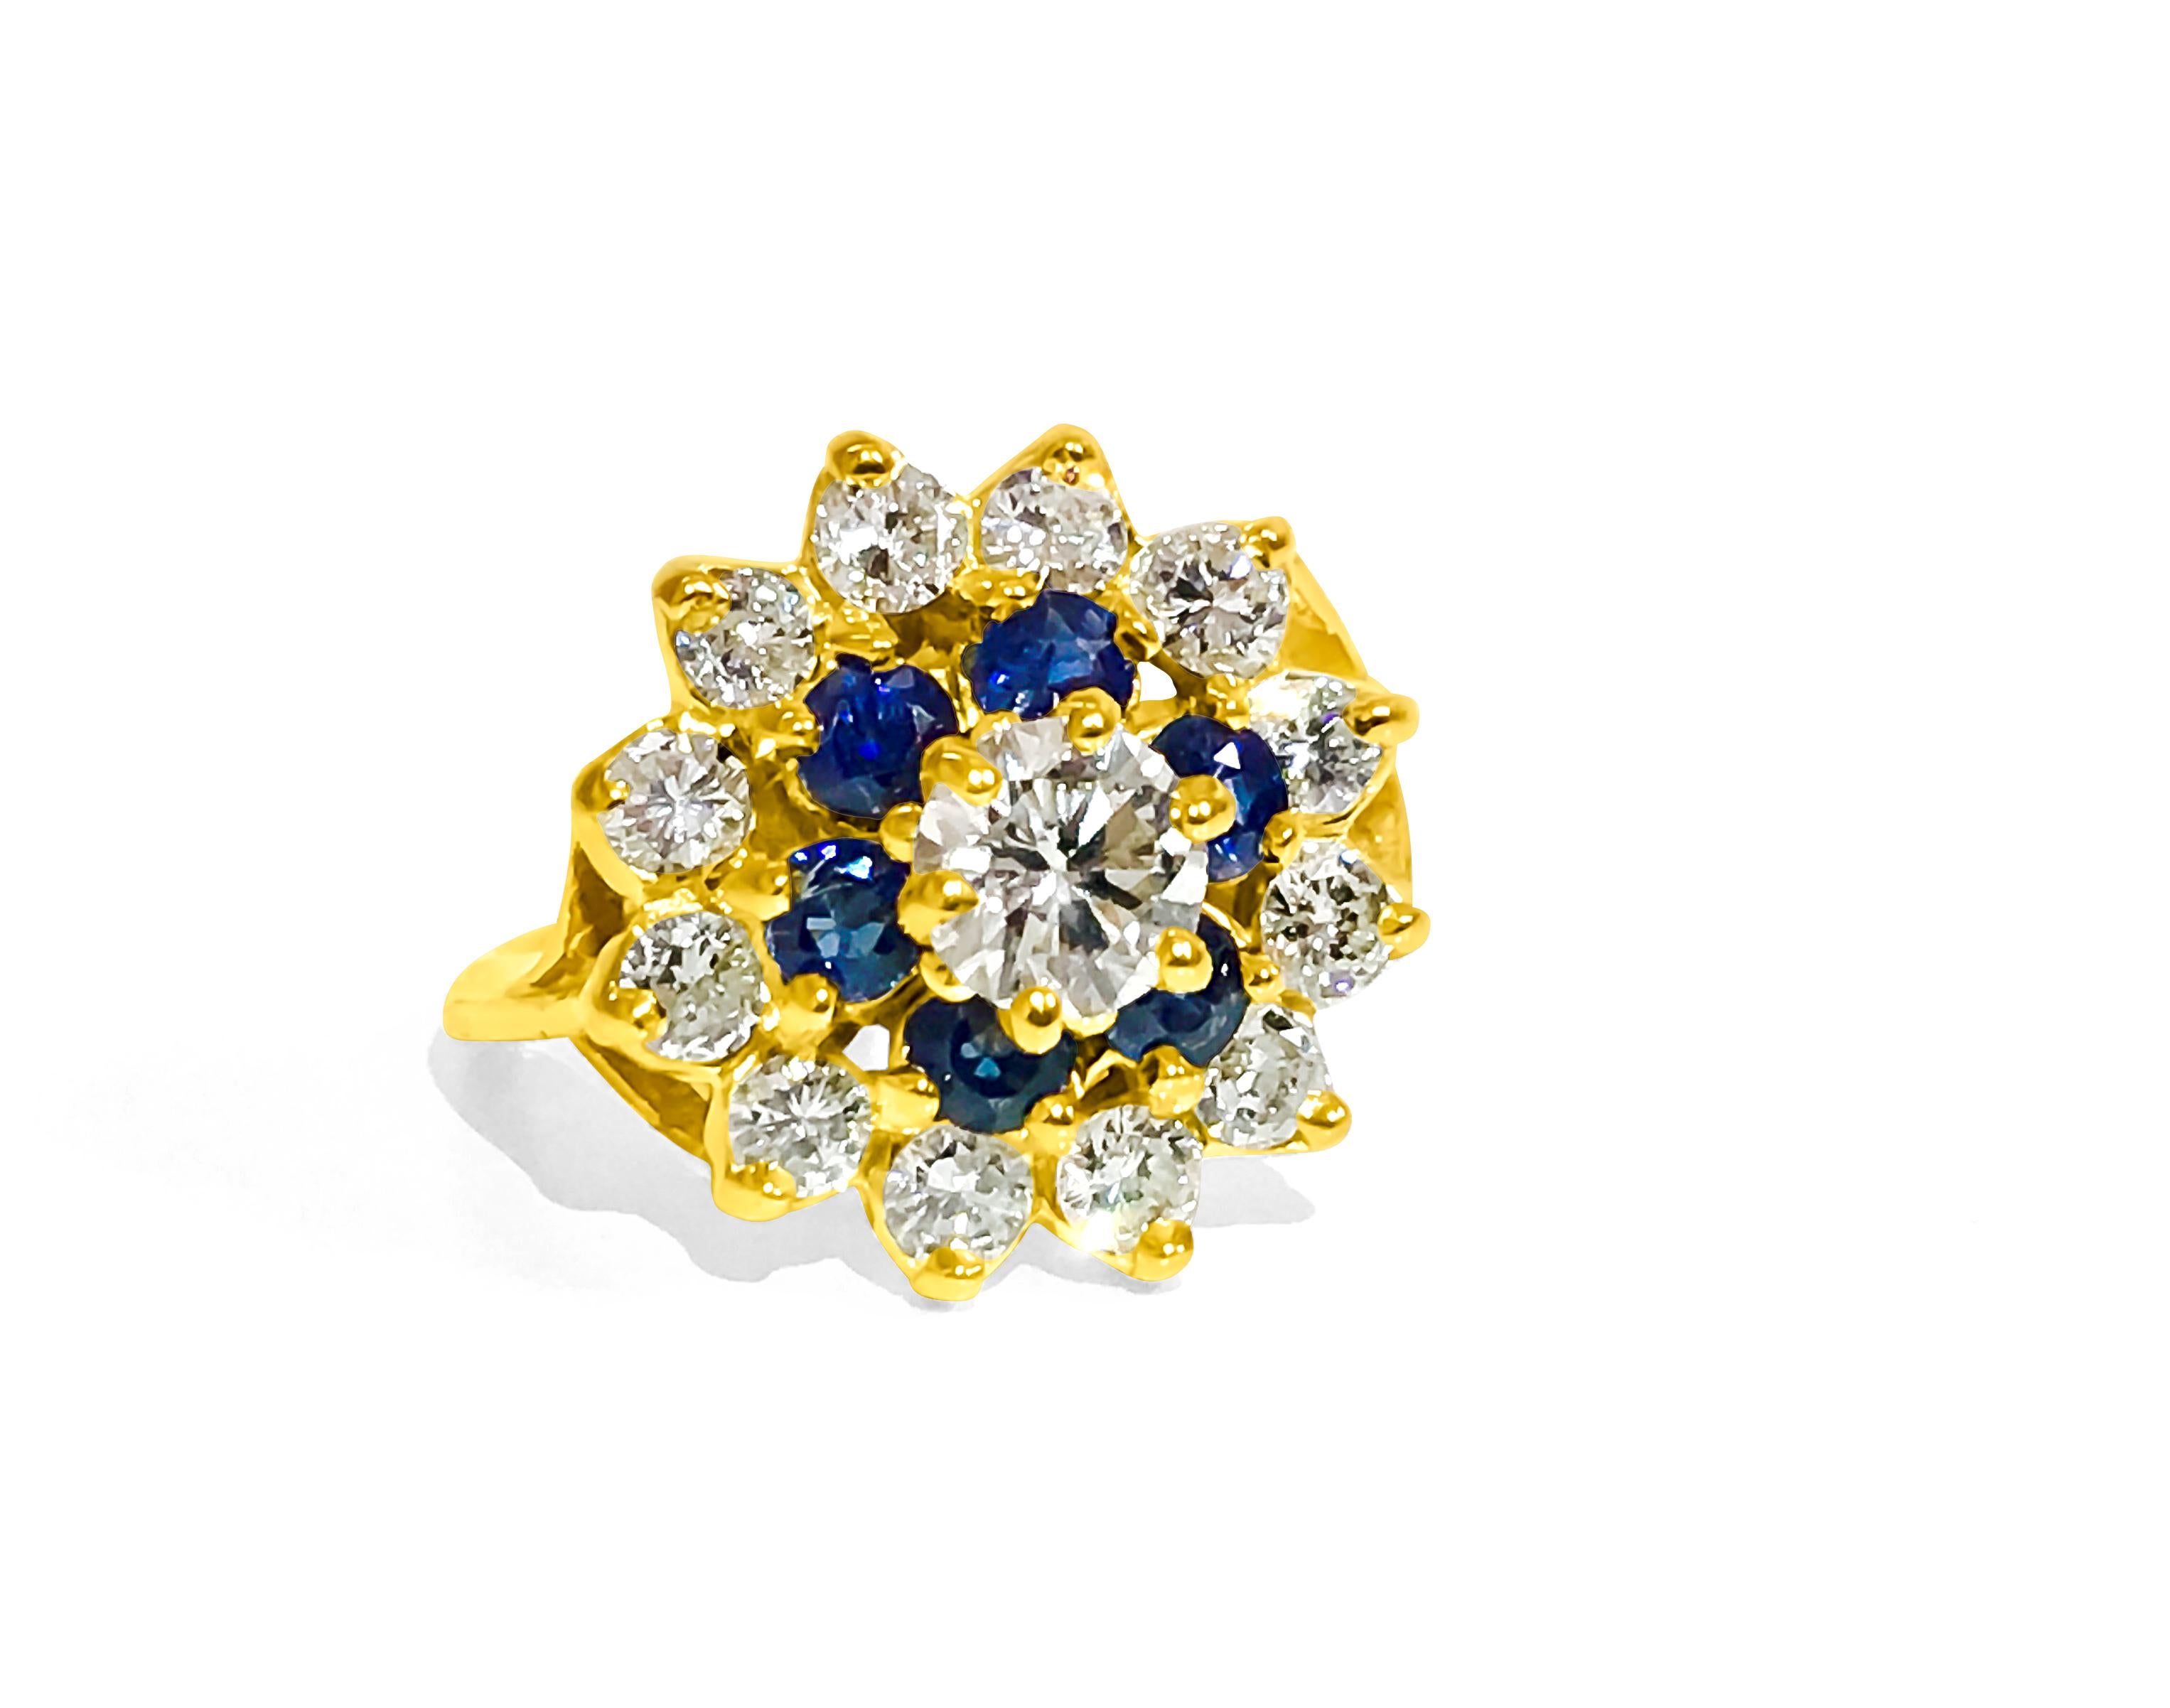 Metal: 18K Yellow Gold. 
0.76 carat center diamond. 1.00 Carat side diamonds. VS clarity and G color. 
0.36 carat blue sapphires. 
Total carat weight of all precious stones: 2.12 carats. 
All stones 100% natural earth mined. Excellent diamond and